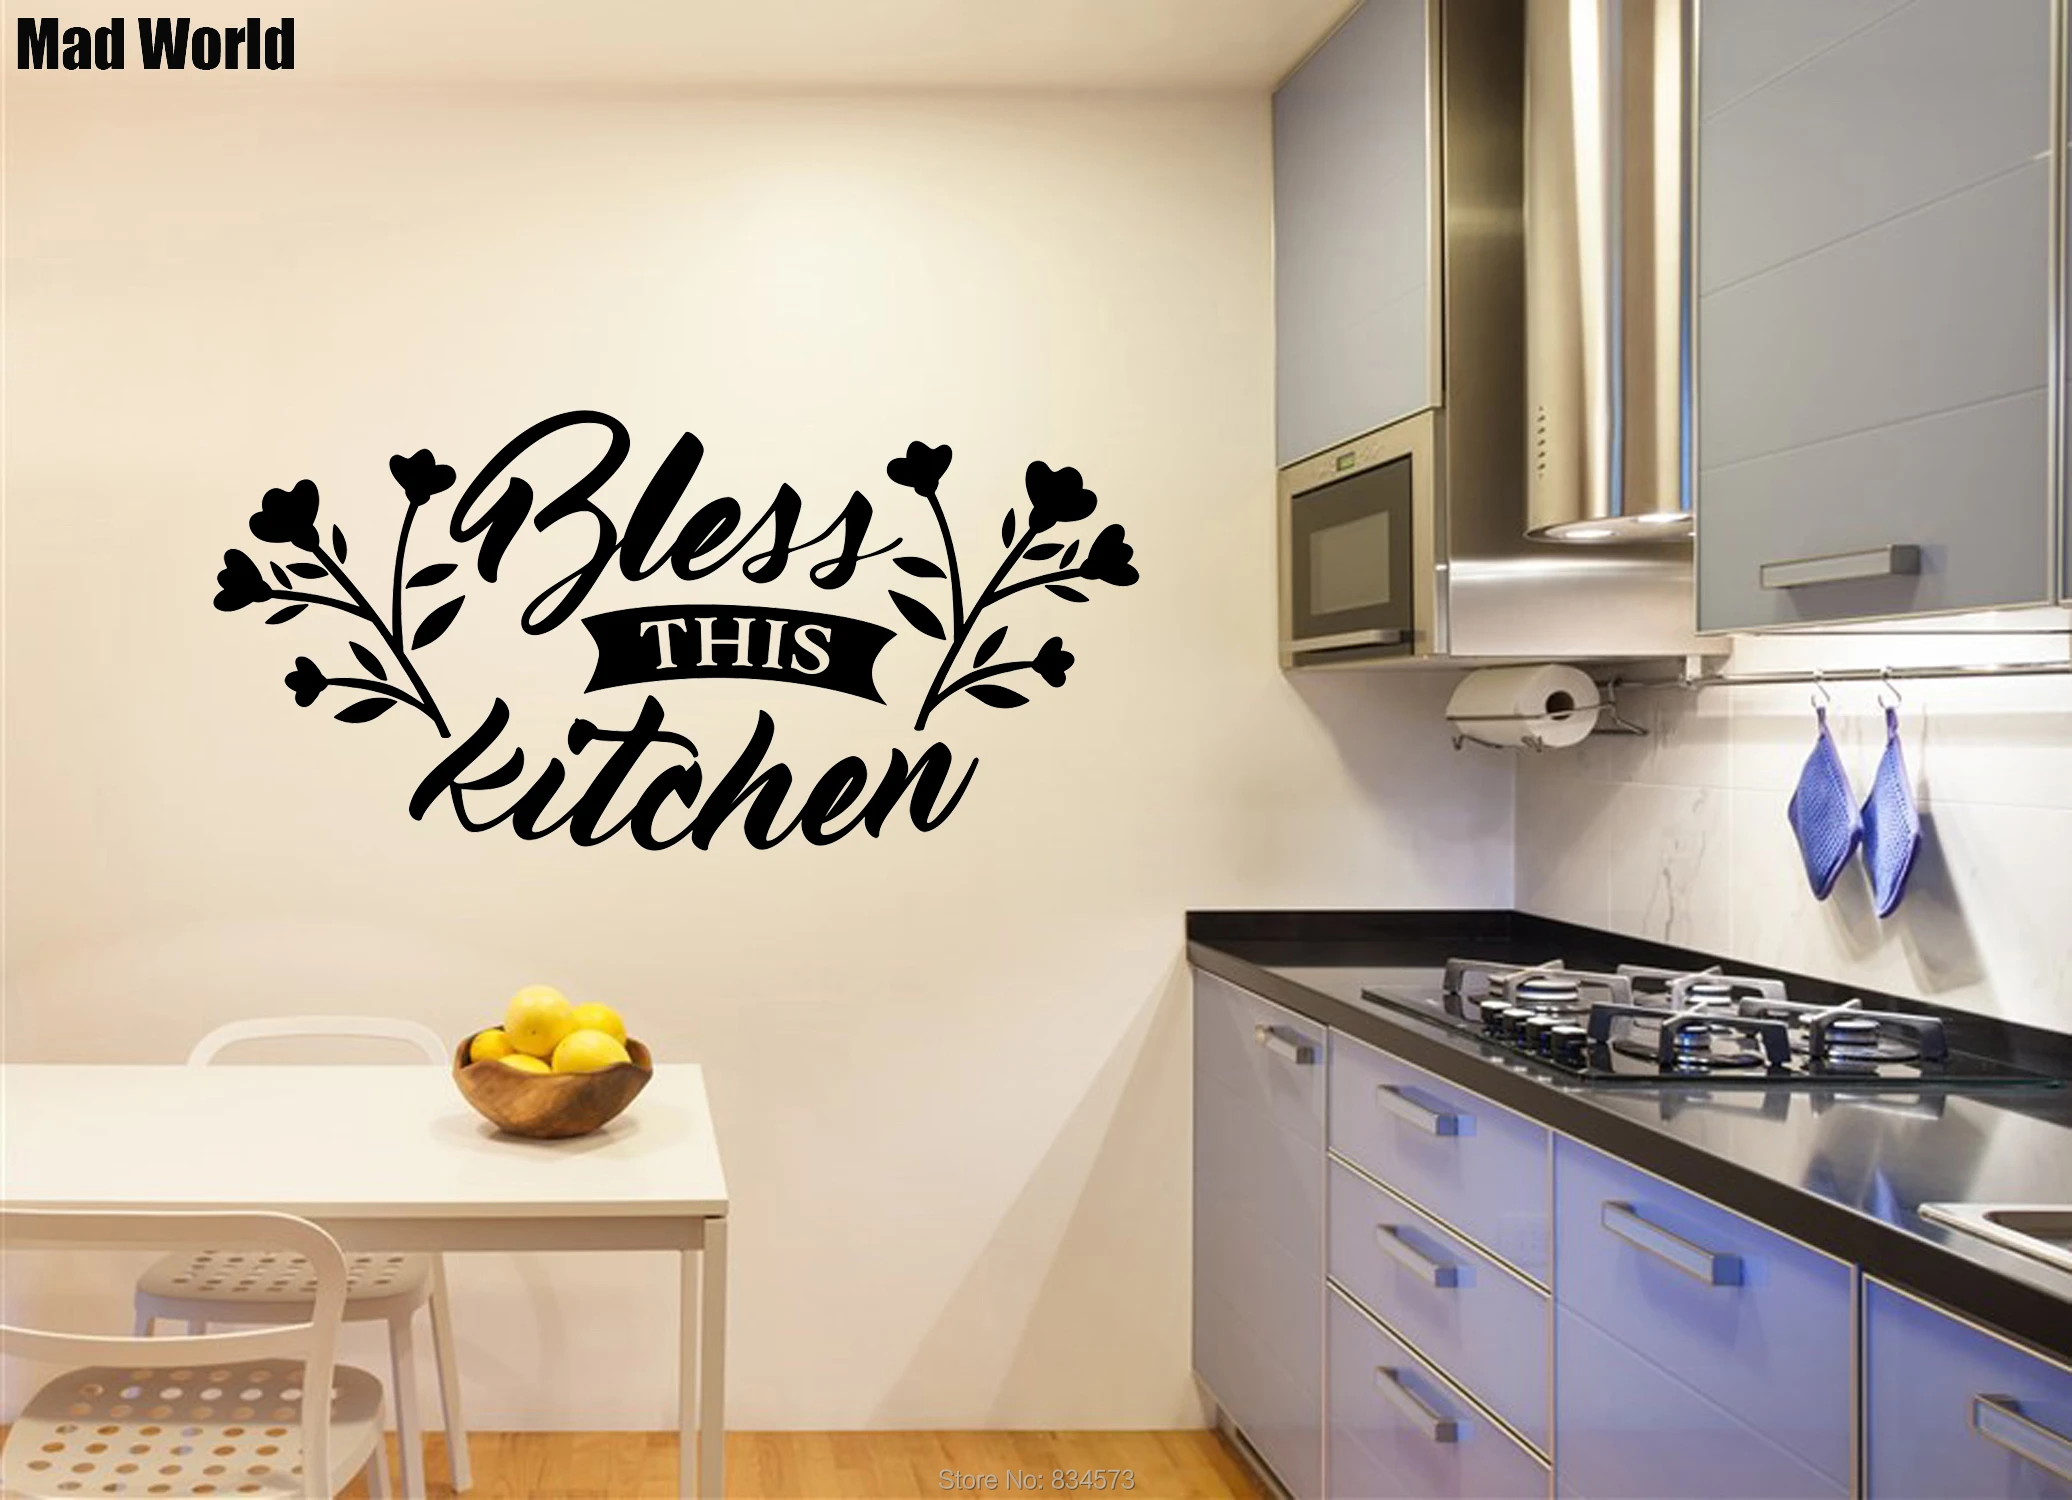 Mad World Bless this Kitchen Kitchen Quote Wall Art Stickers Wall Decals  Home DIY Decoration Removable Room Decor Wall Stickers